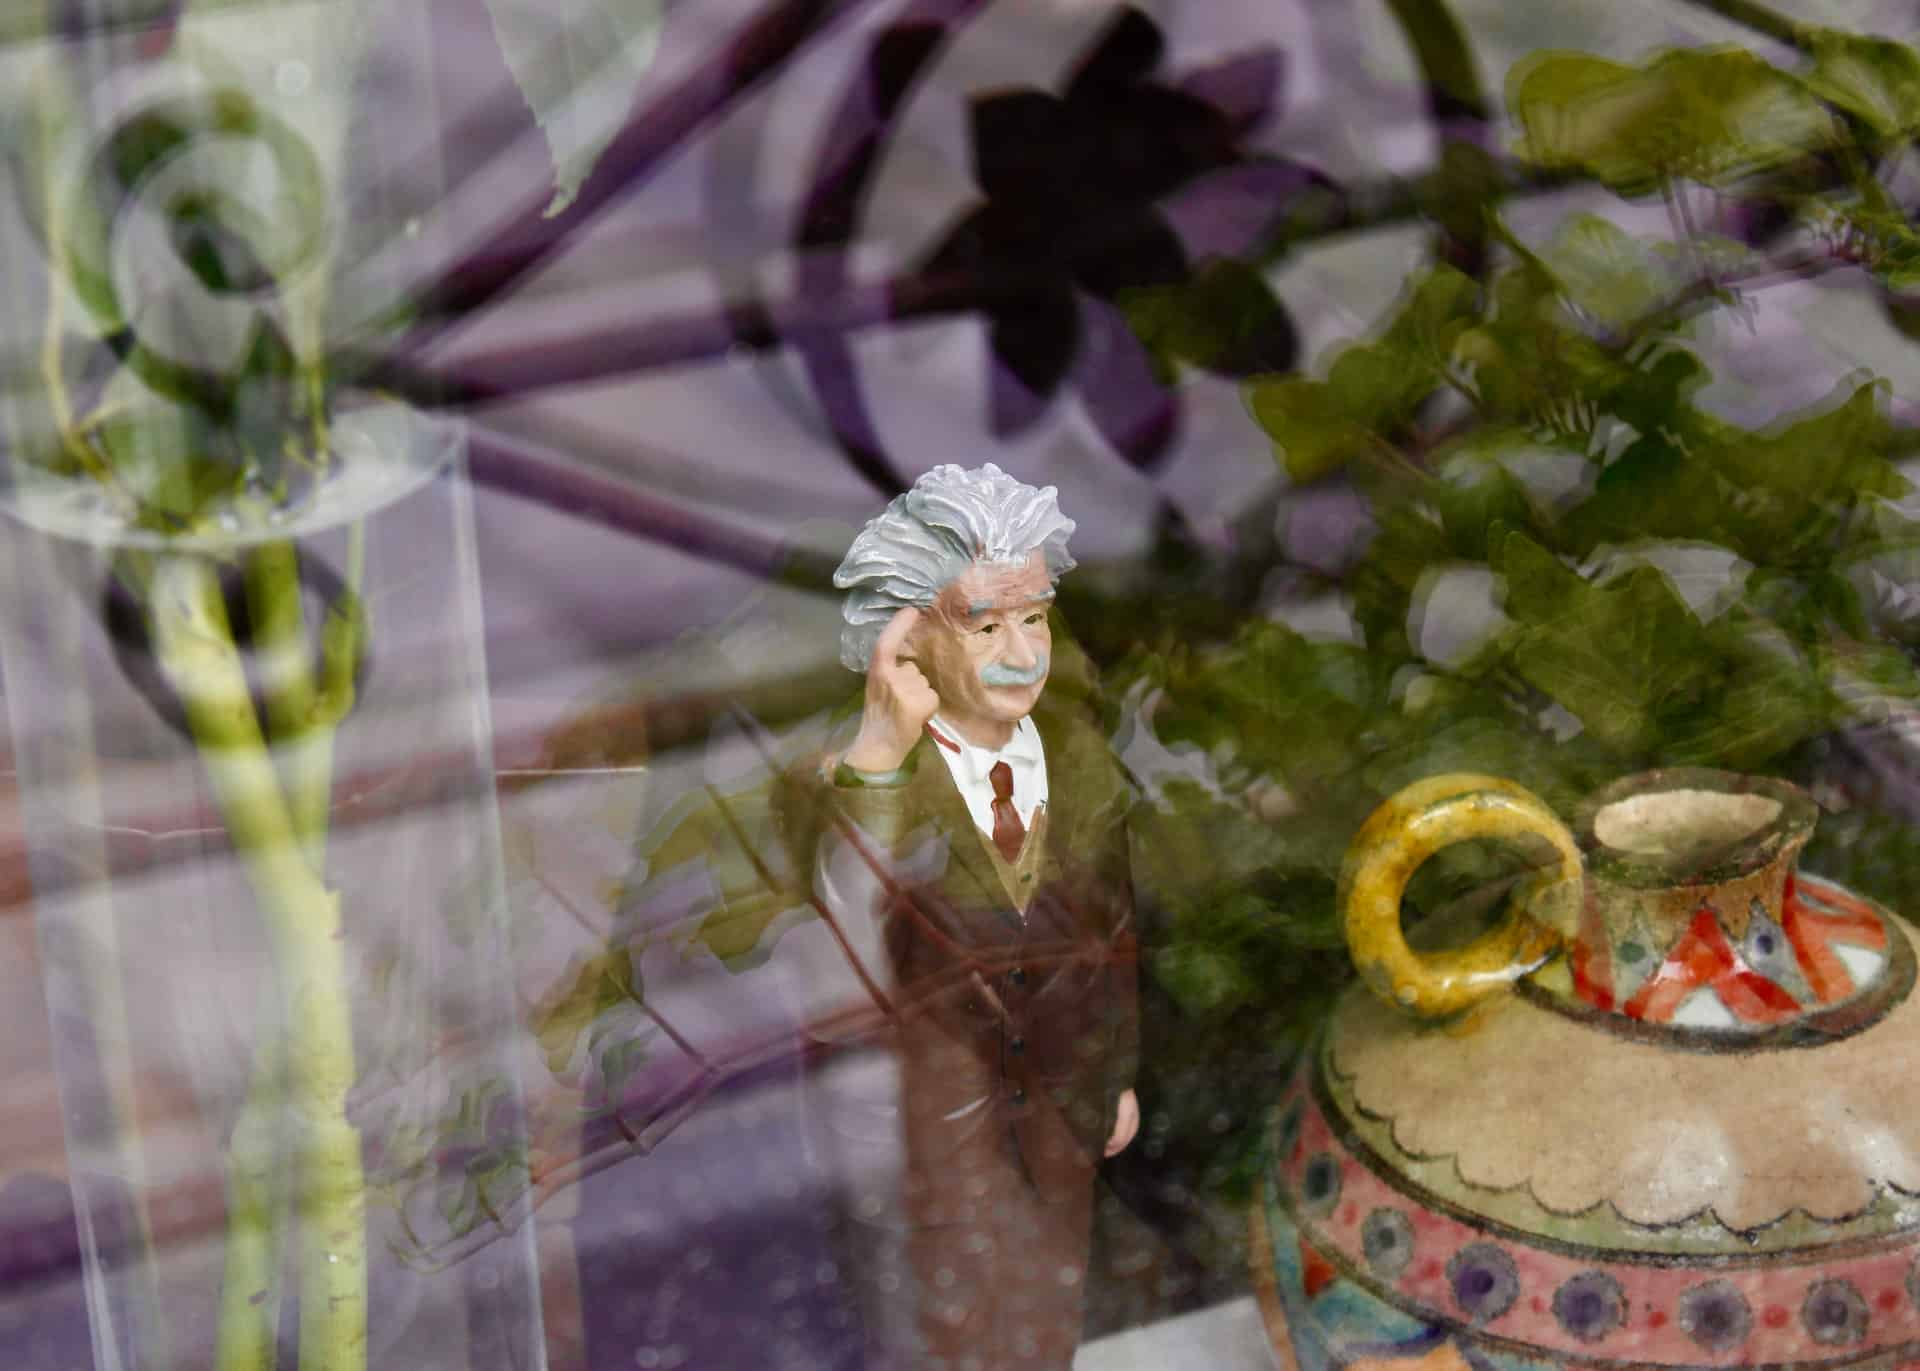 The image shows a male figurine and teapot behind glass to illustrate the concept of lean thinking.